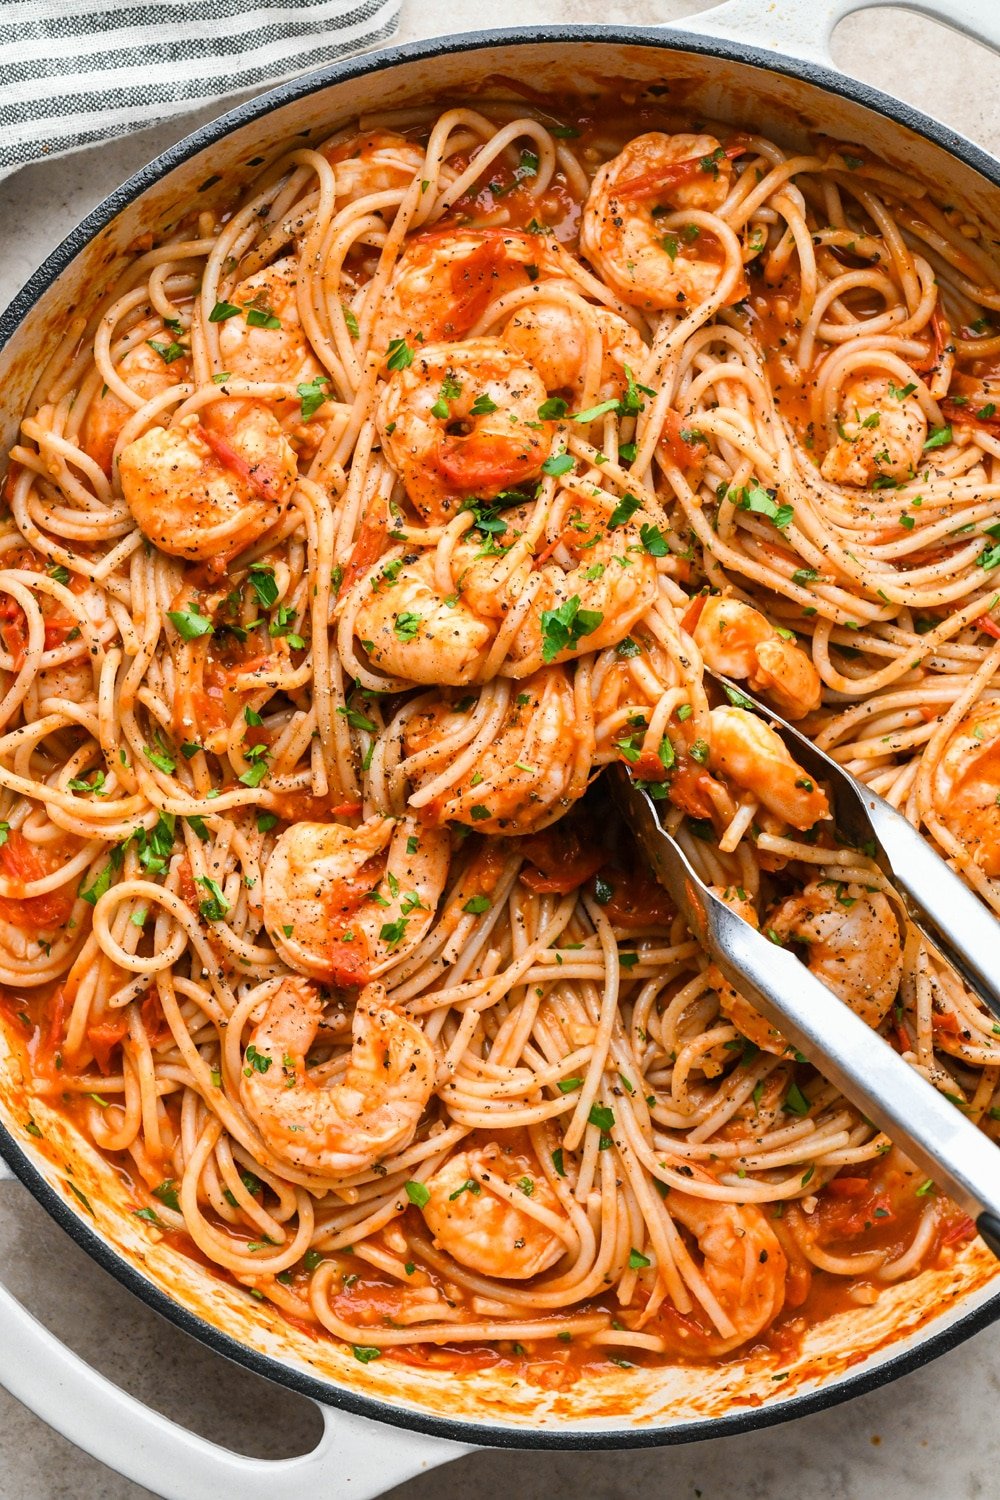 Burst cherry tomato and shrimp pasta fully prepared in a large enameled skillet, with kitchen tongs reaching into the pasta to pull out a serving.